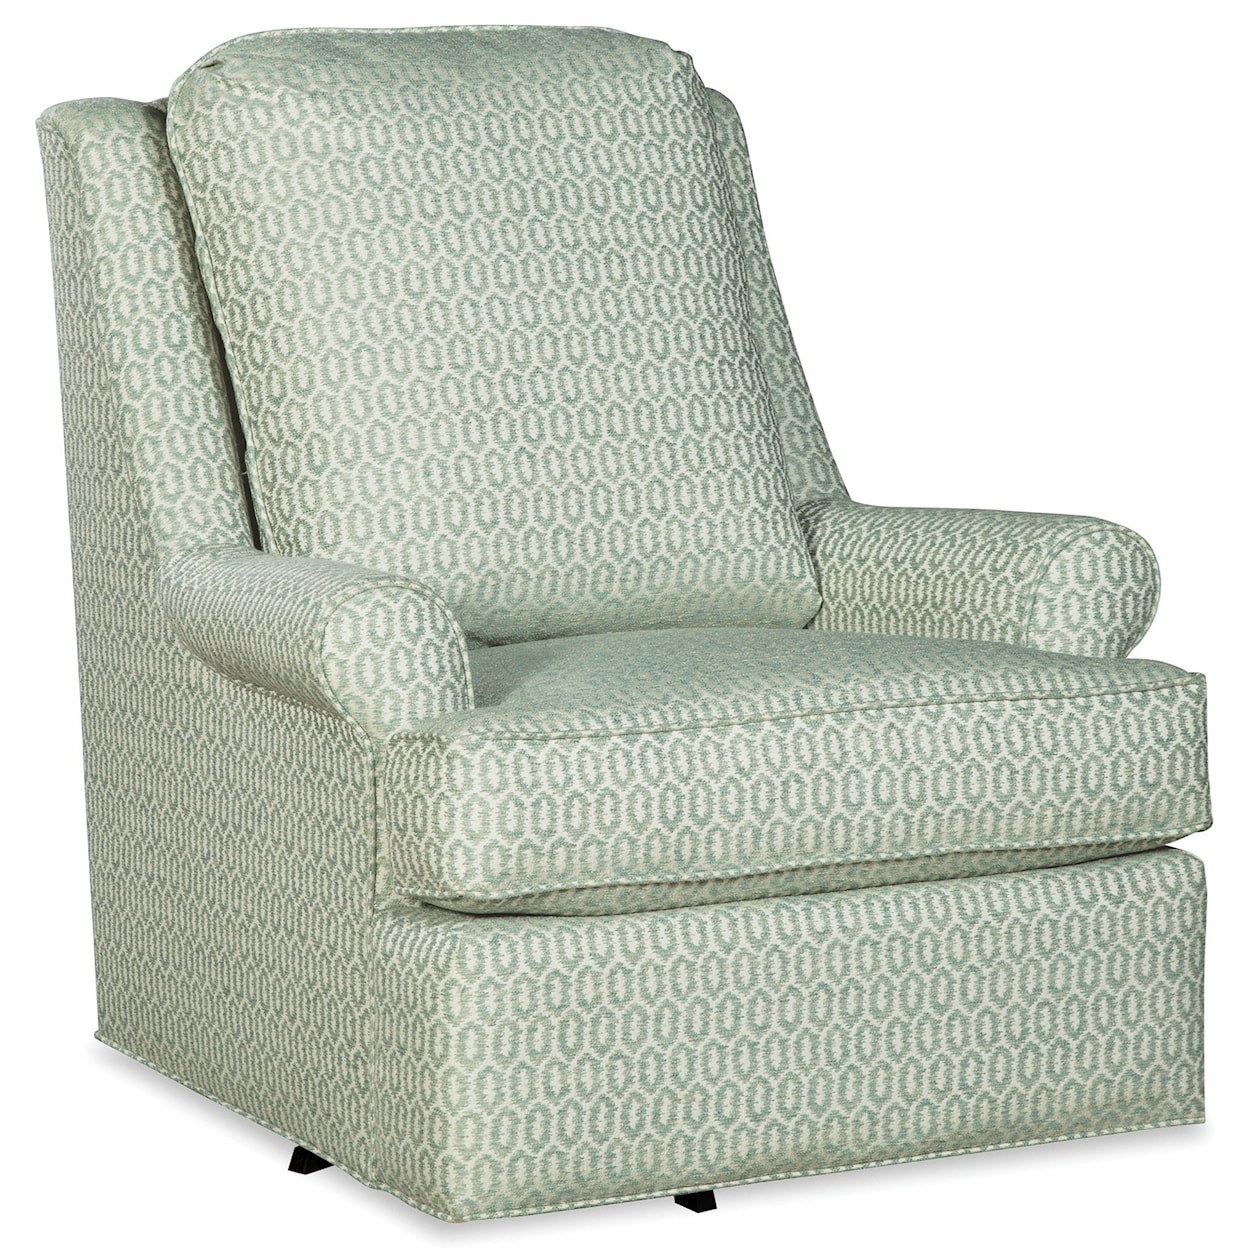 Paula Deen by Craftmaster Upholstered Chairs Swivel Chair